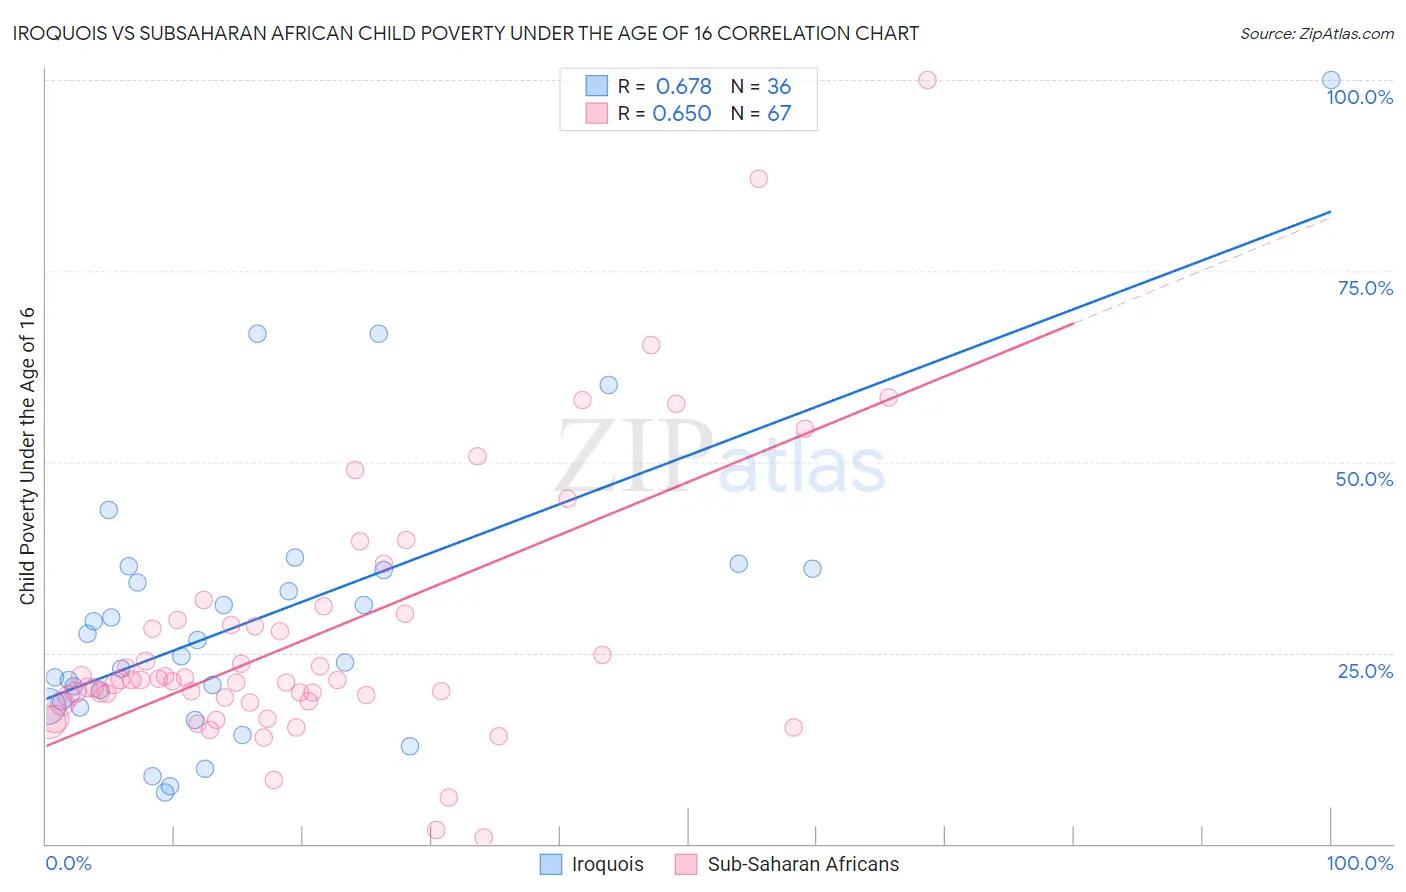 Iroquois vs Subsaharan African Child Poverty Under the Age of 16